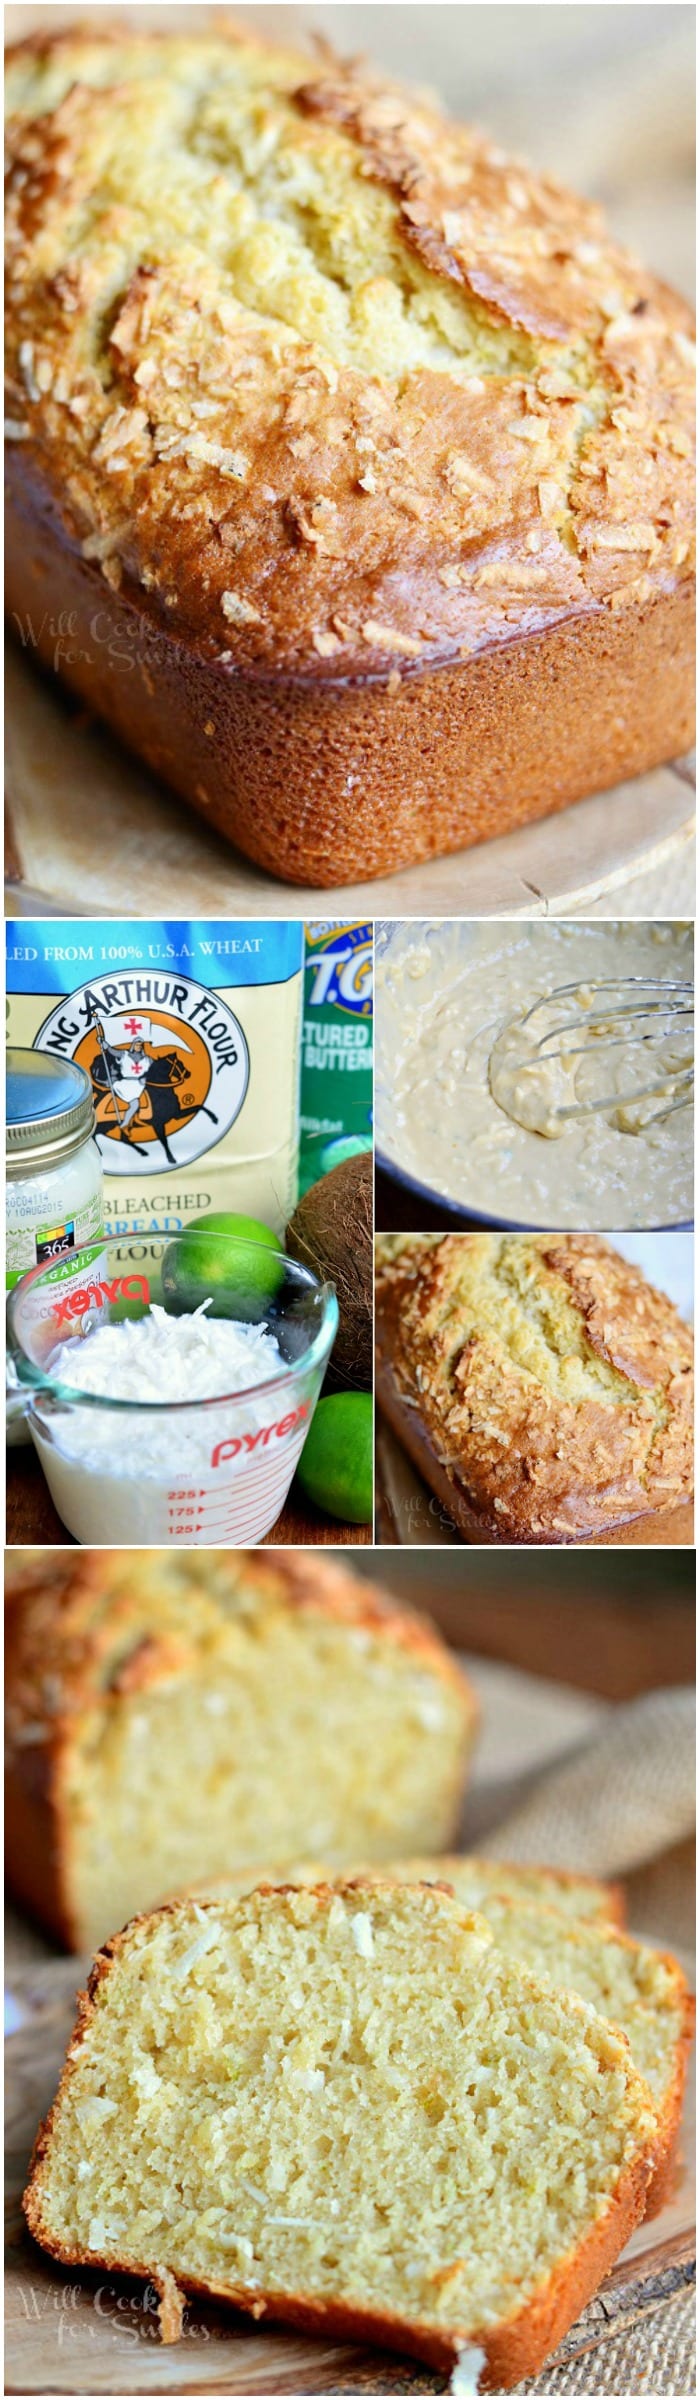 Coconut Key Lime Bread. This is one AMAZING bread! Coconut Key Lime Bread is a soft bread that explodes with flavor in every bite. #coconut #sweetbread #noyeast #bread #coconutkeylime #keylime